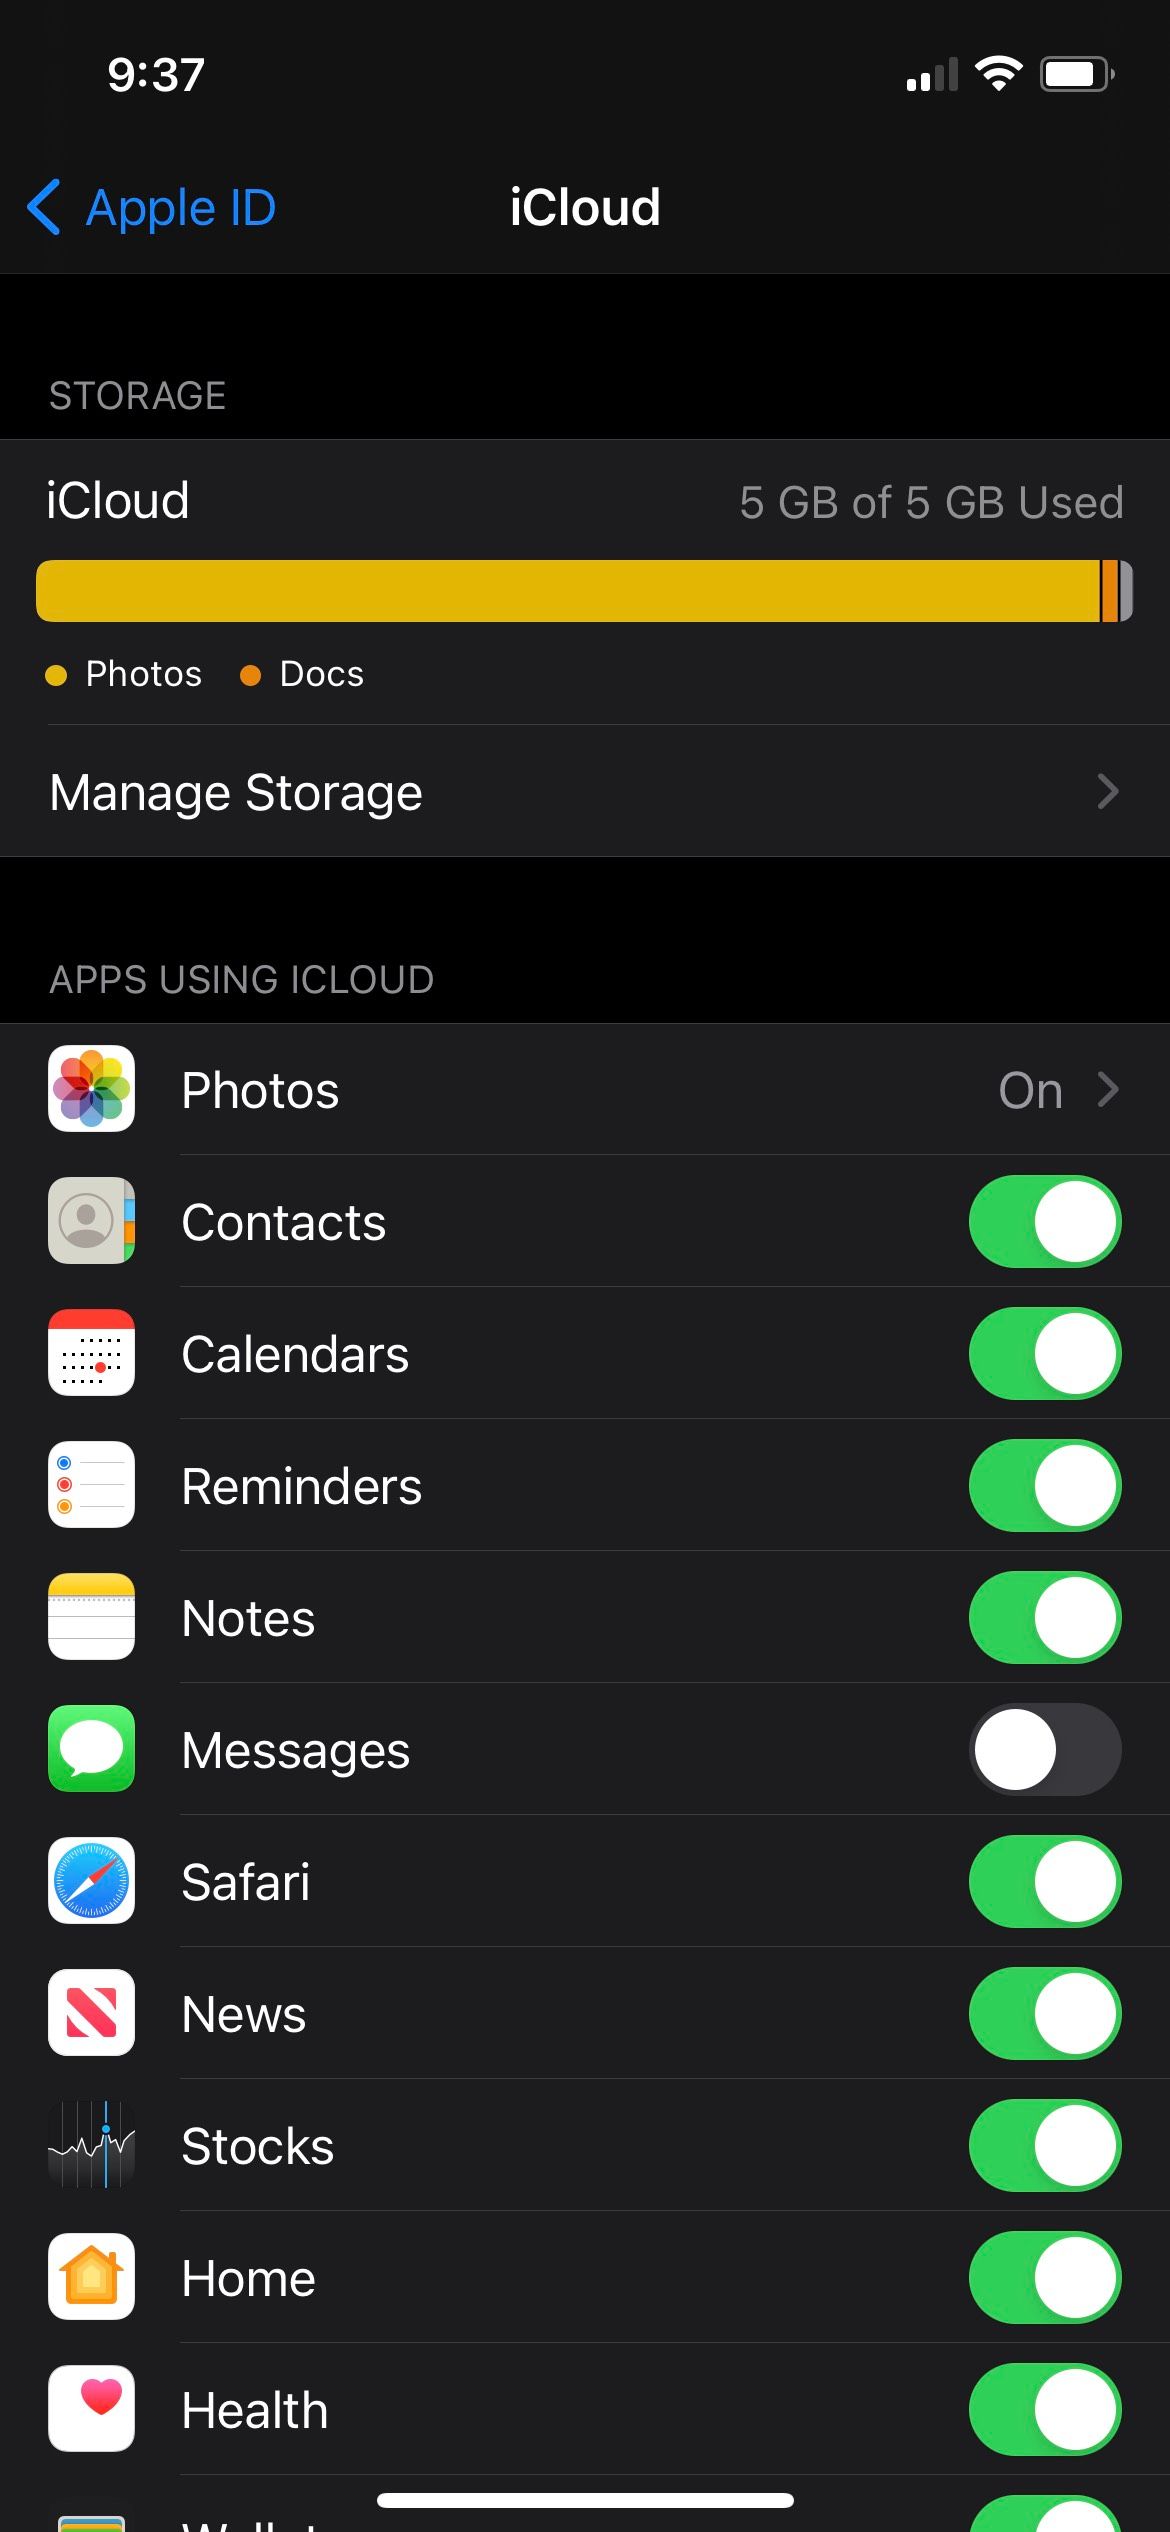 256GB iPhone Vs 200GB iCloud Online Storage: Pros & Cons Explained